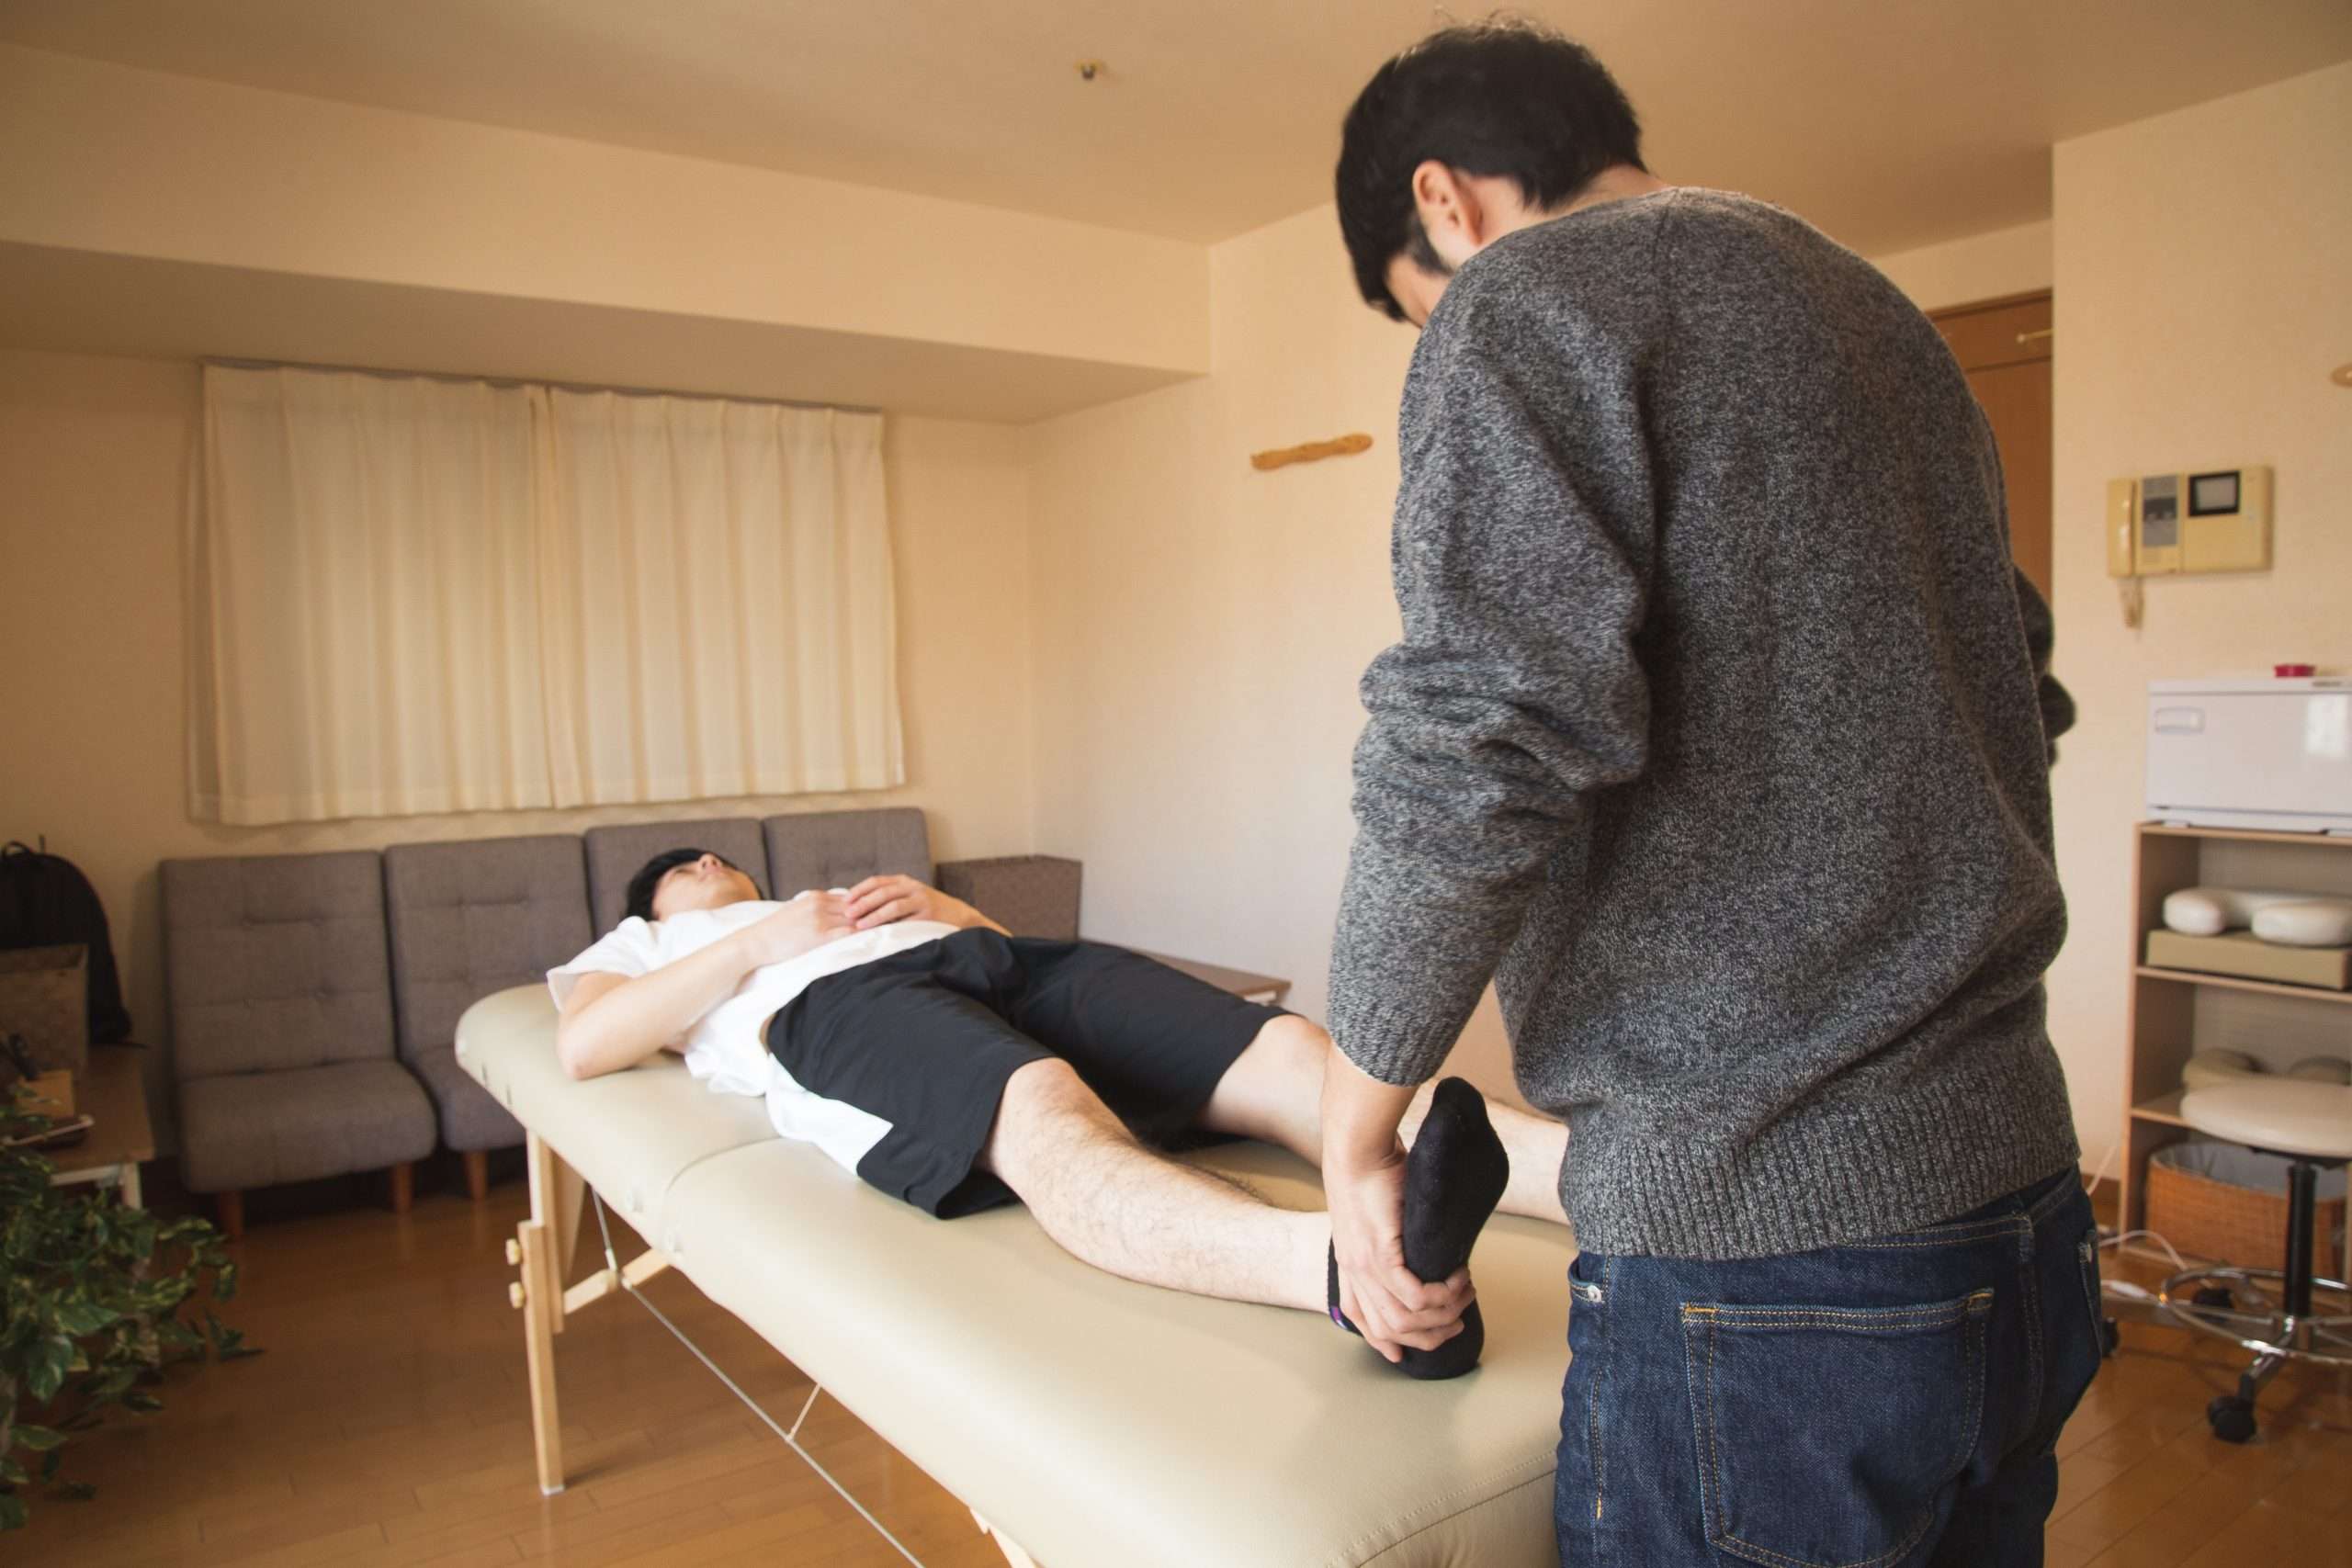 A person laid on a table with a physiotherapist examining them.